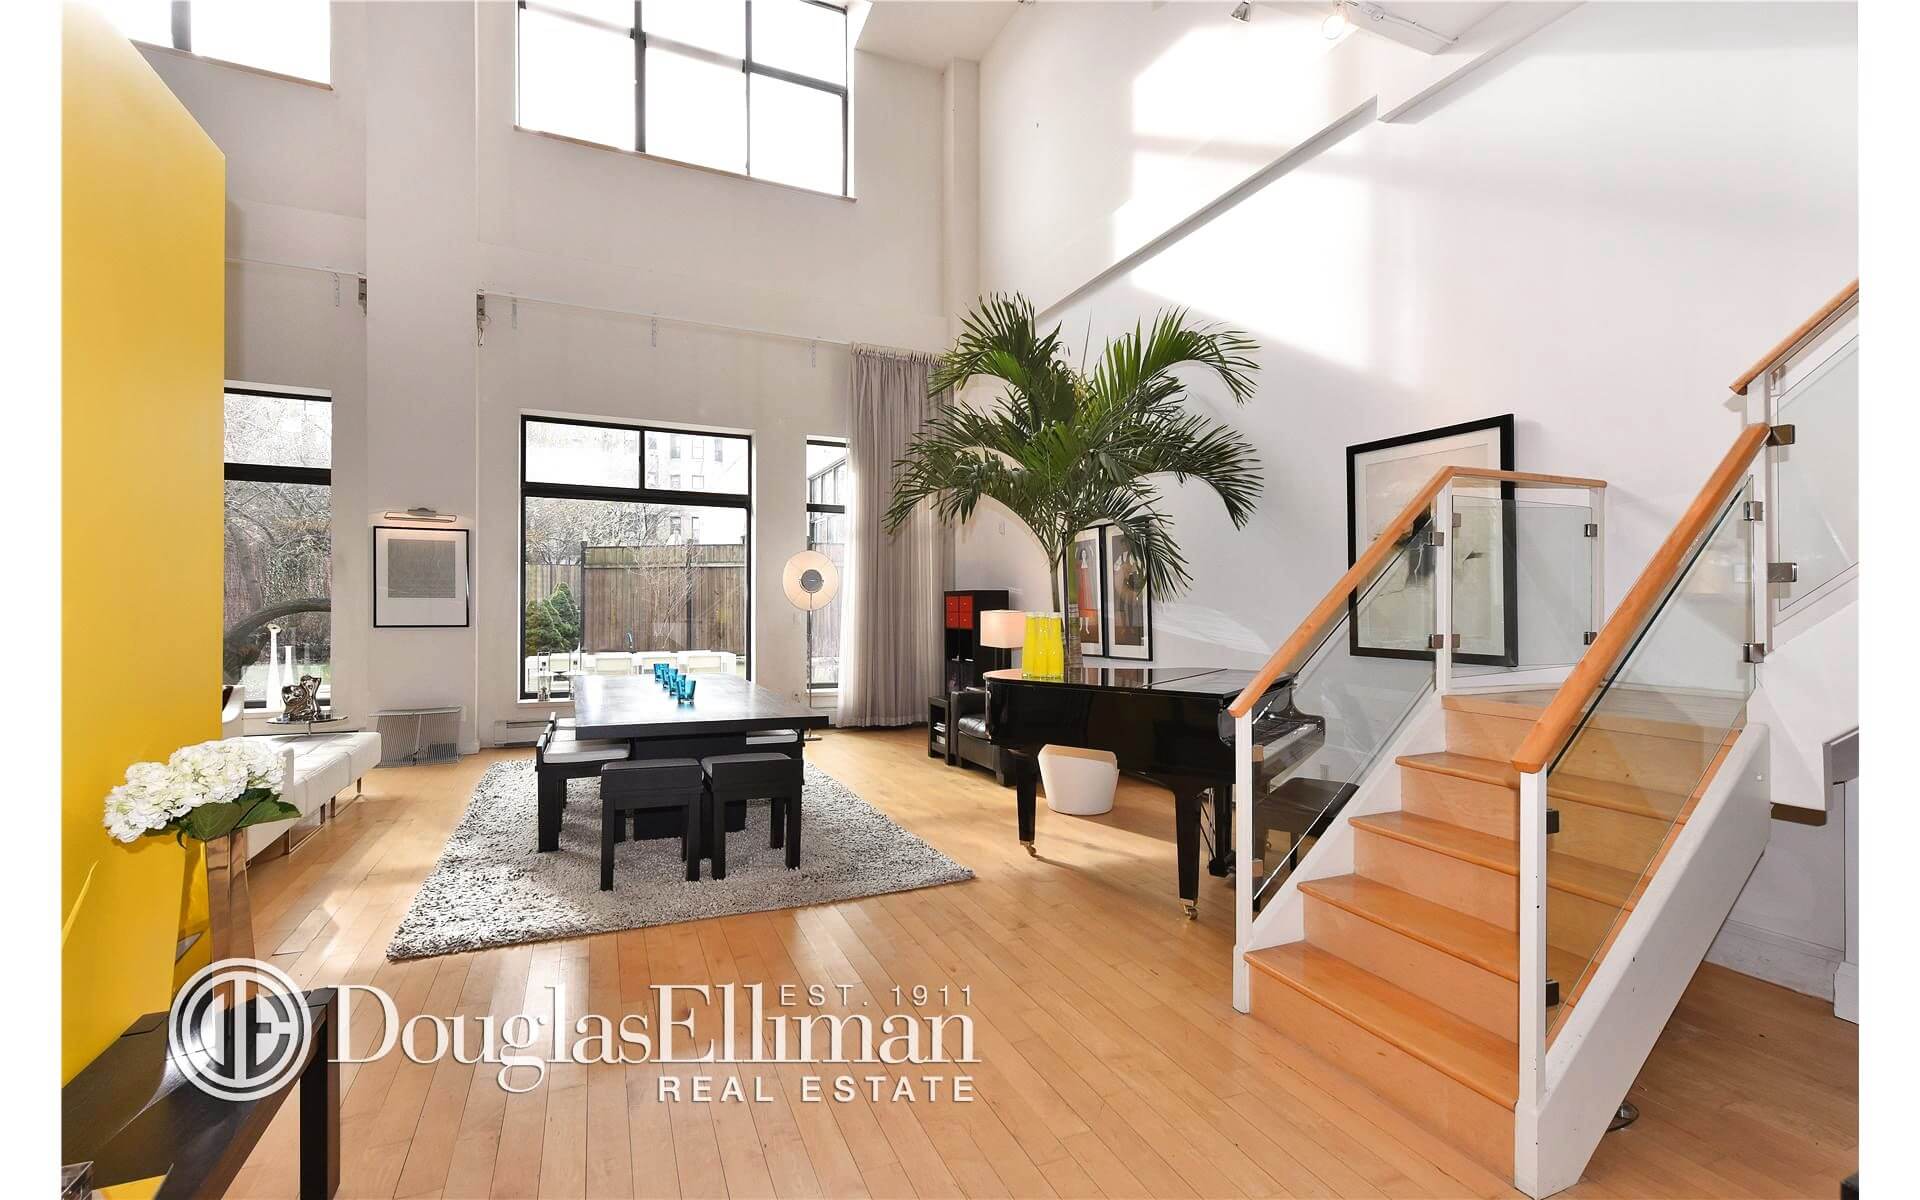 Prospect Heights Brooklyn Condo for Sale -- 535 Dean Street